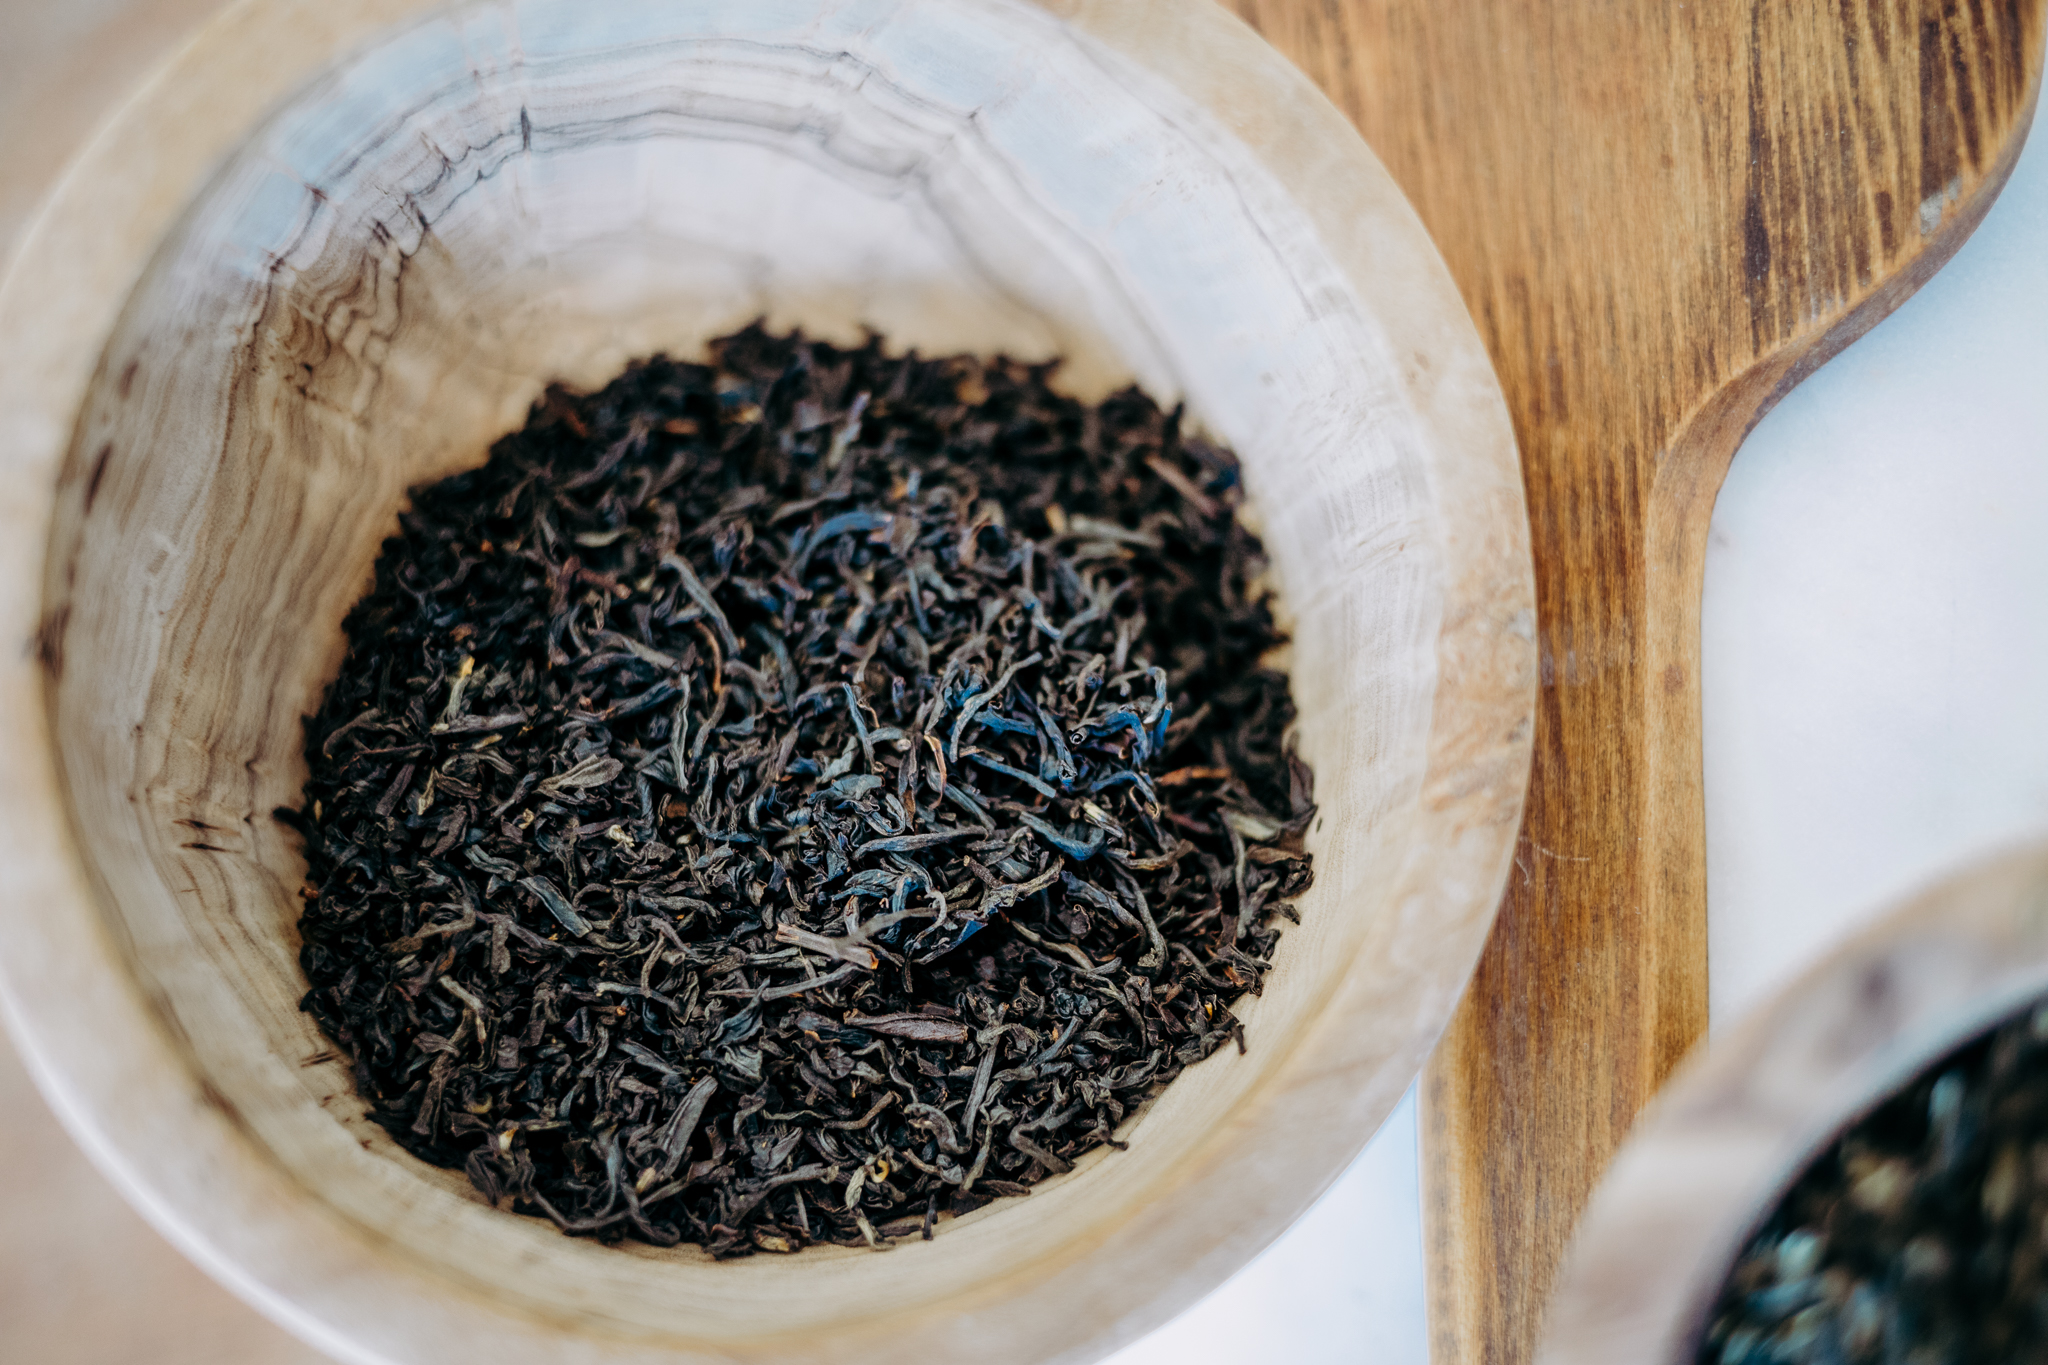 4 Common Types of Tea To Know & How To Use Them | Herbal Academy | Learn about four different but common teas, including black, green, white, and herbal teas, as well as various ways to use and enjoy these types of tea.